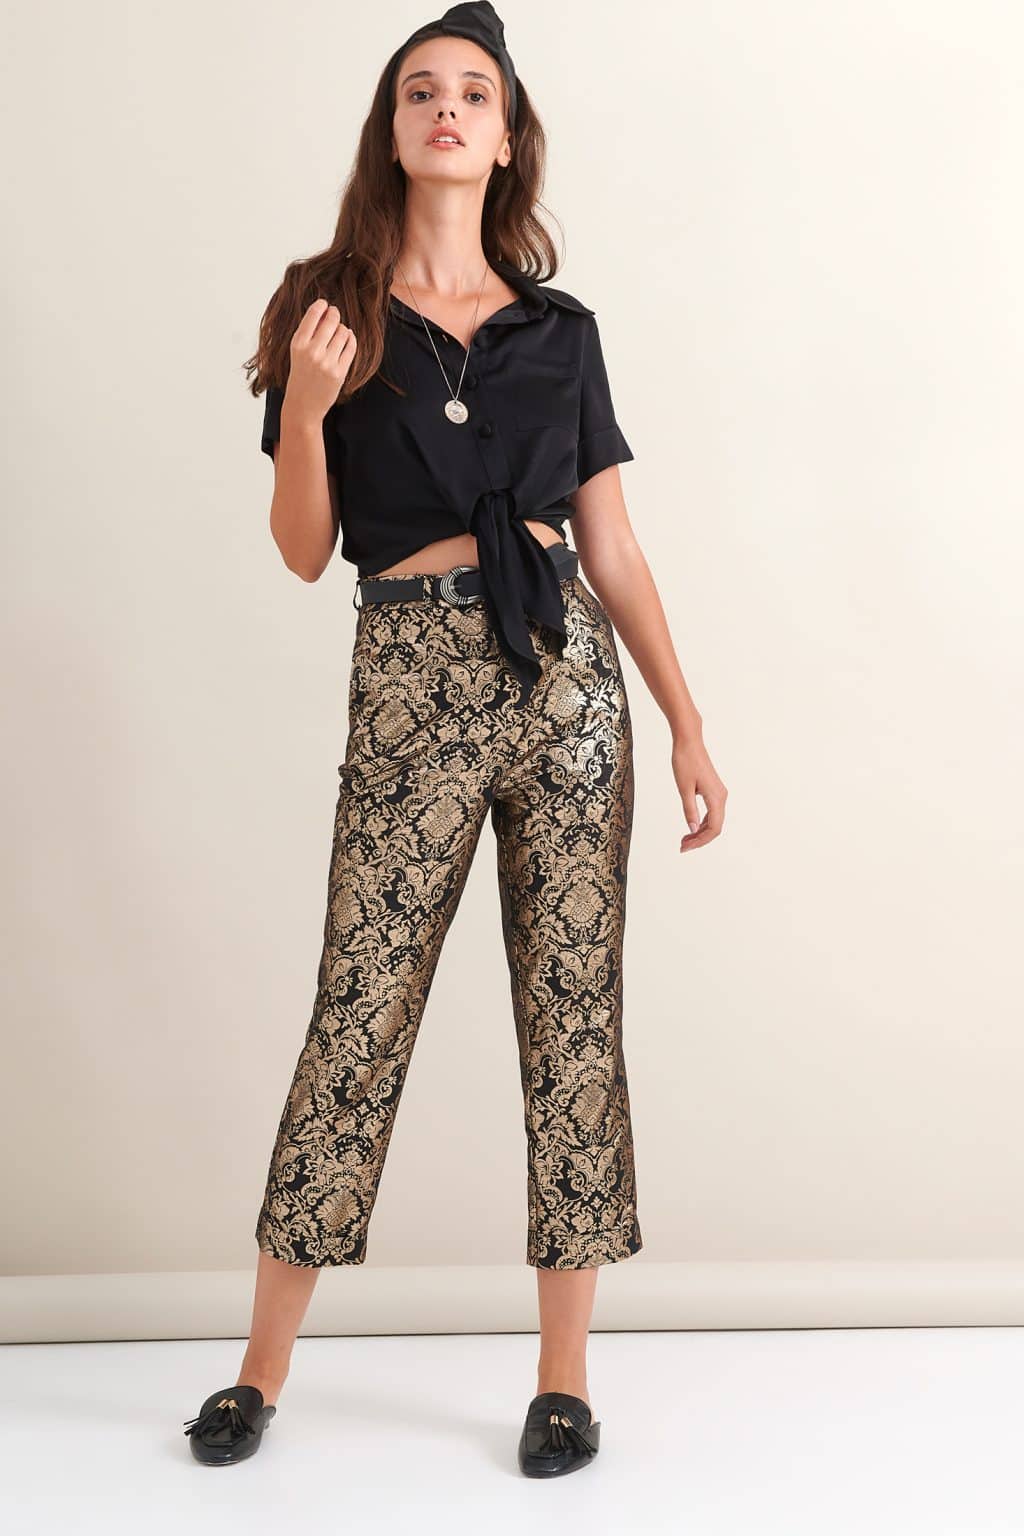 Clothing LACE PRINTED PANTS